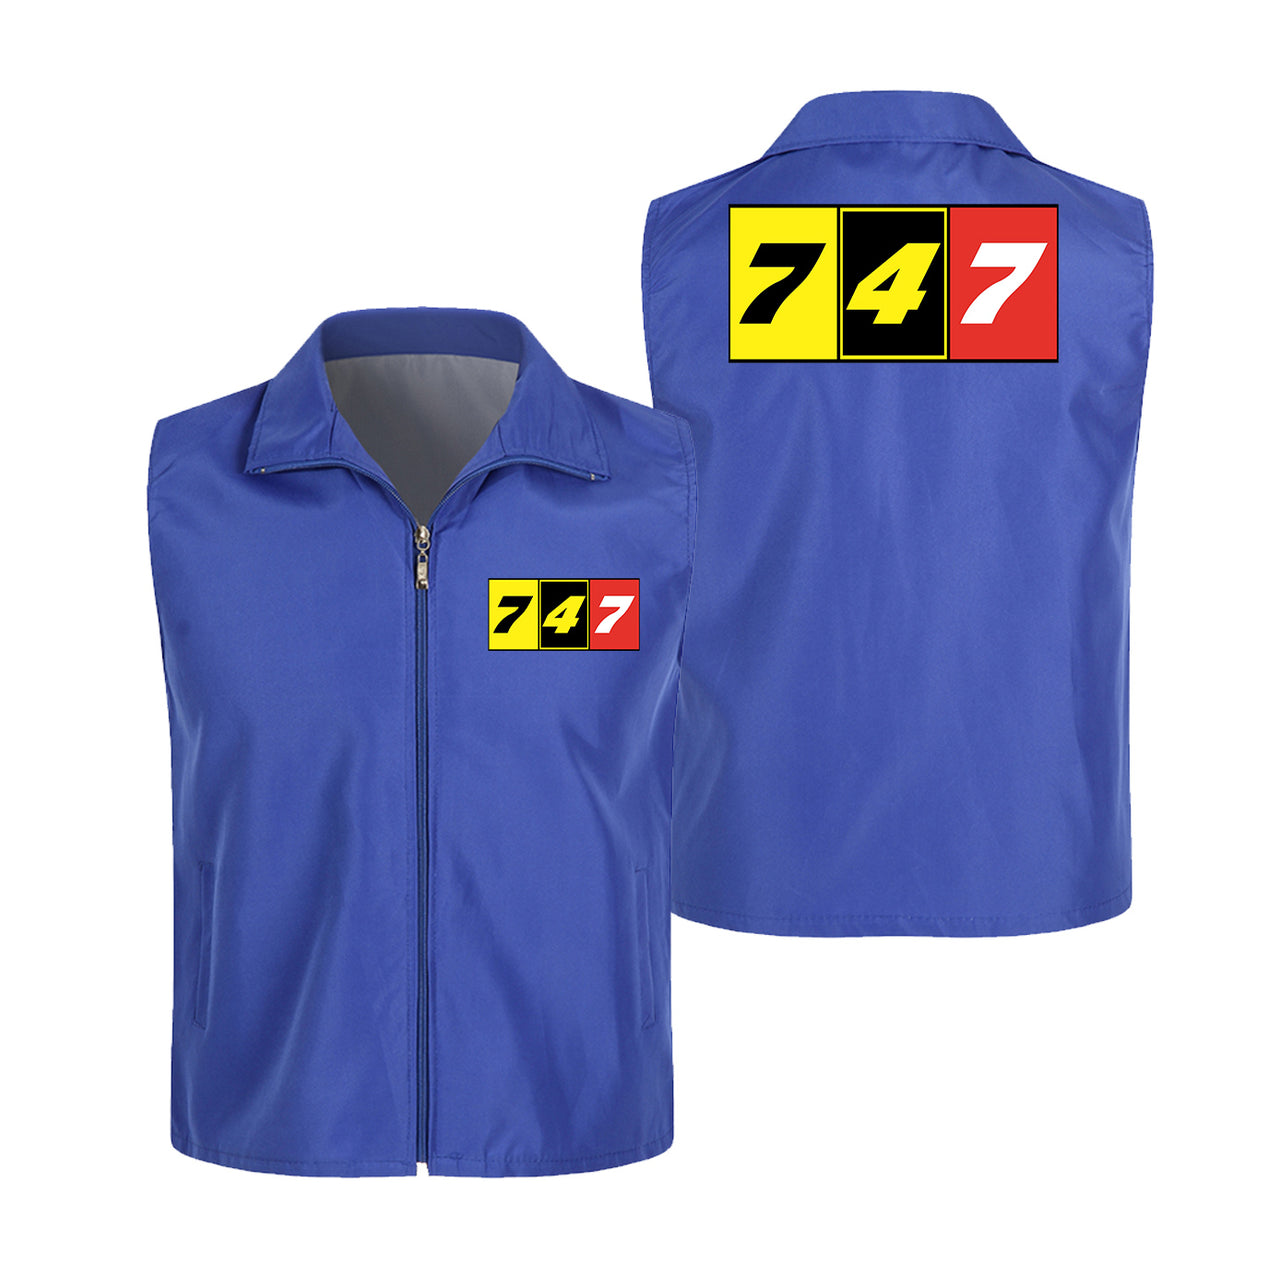 Flat Colourful 747 Designed Thin Style Vests